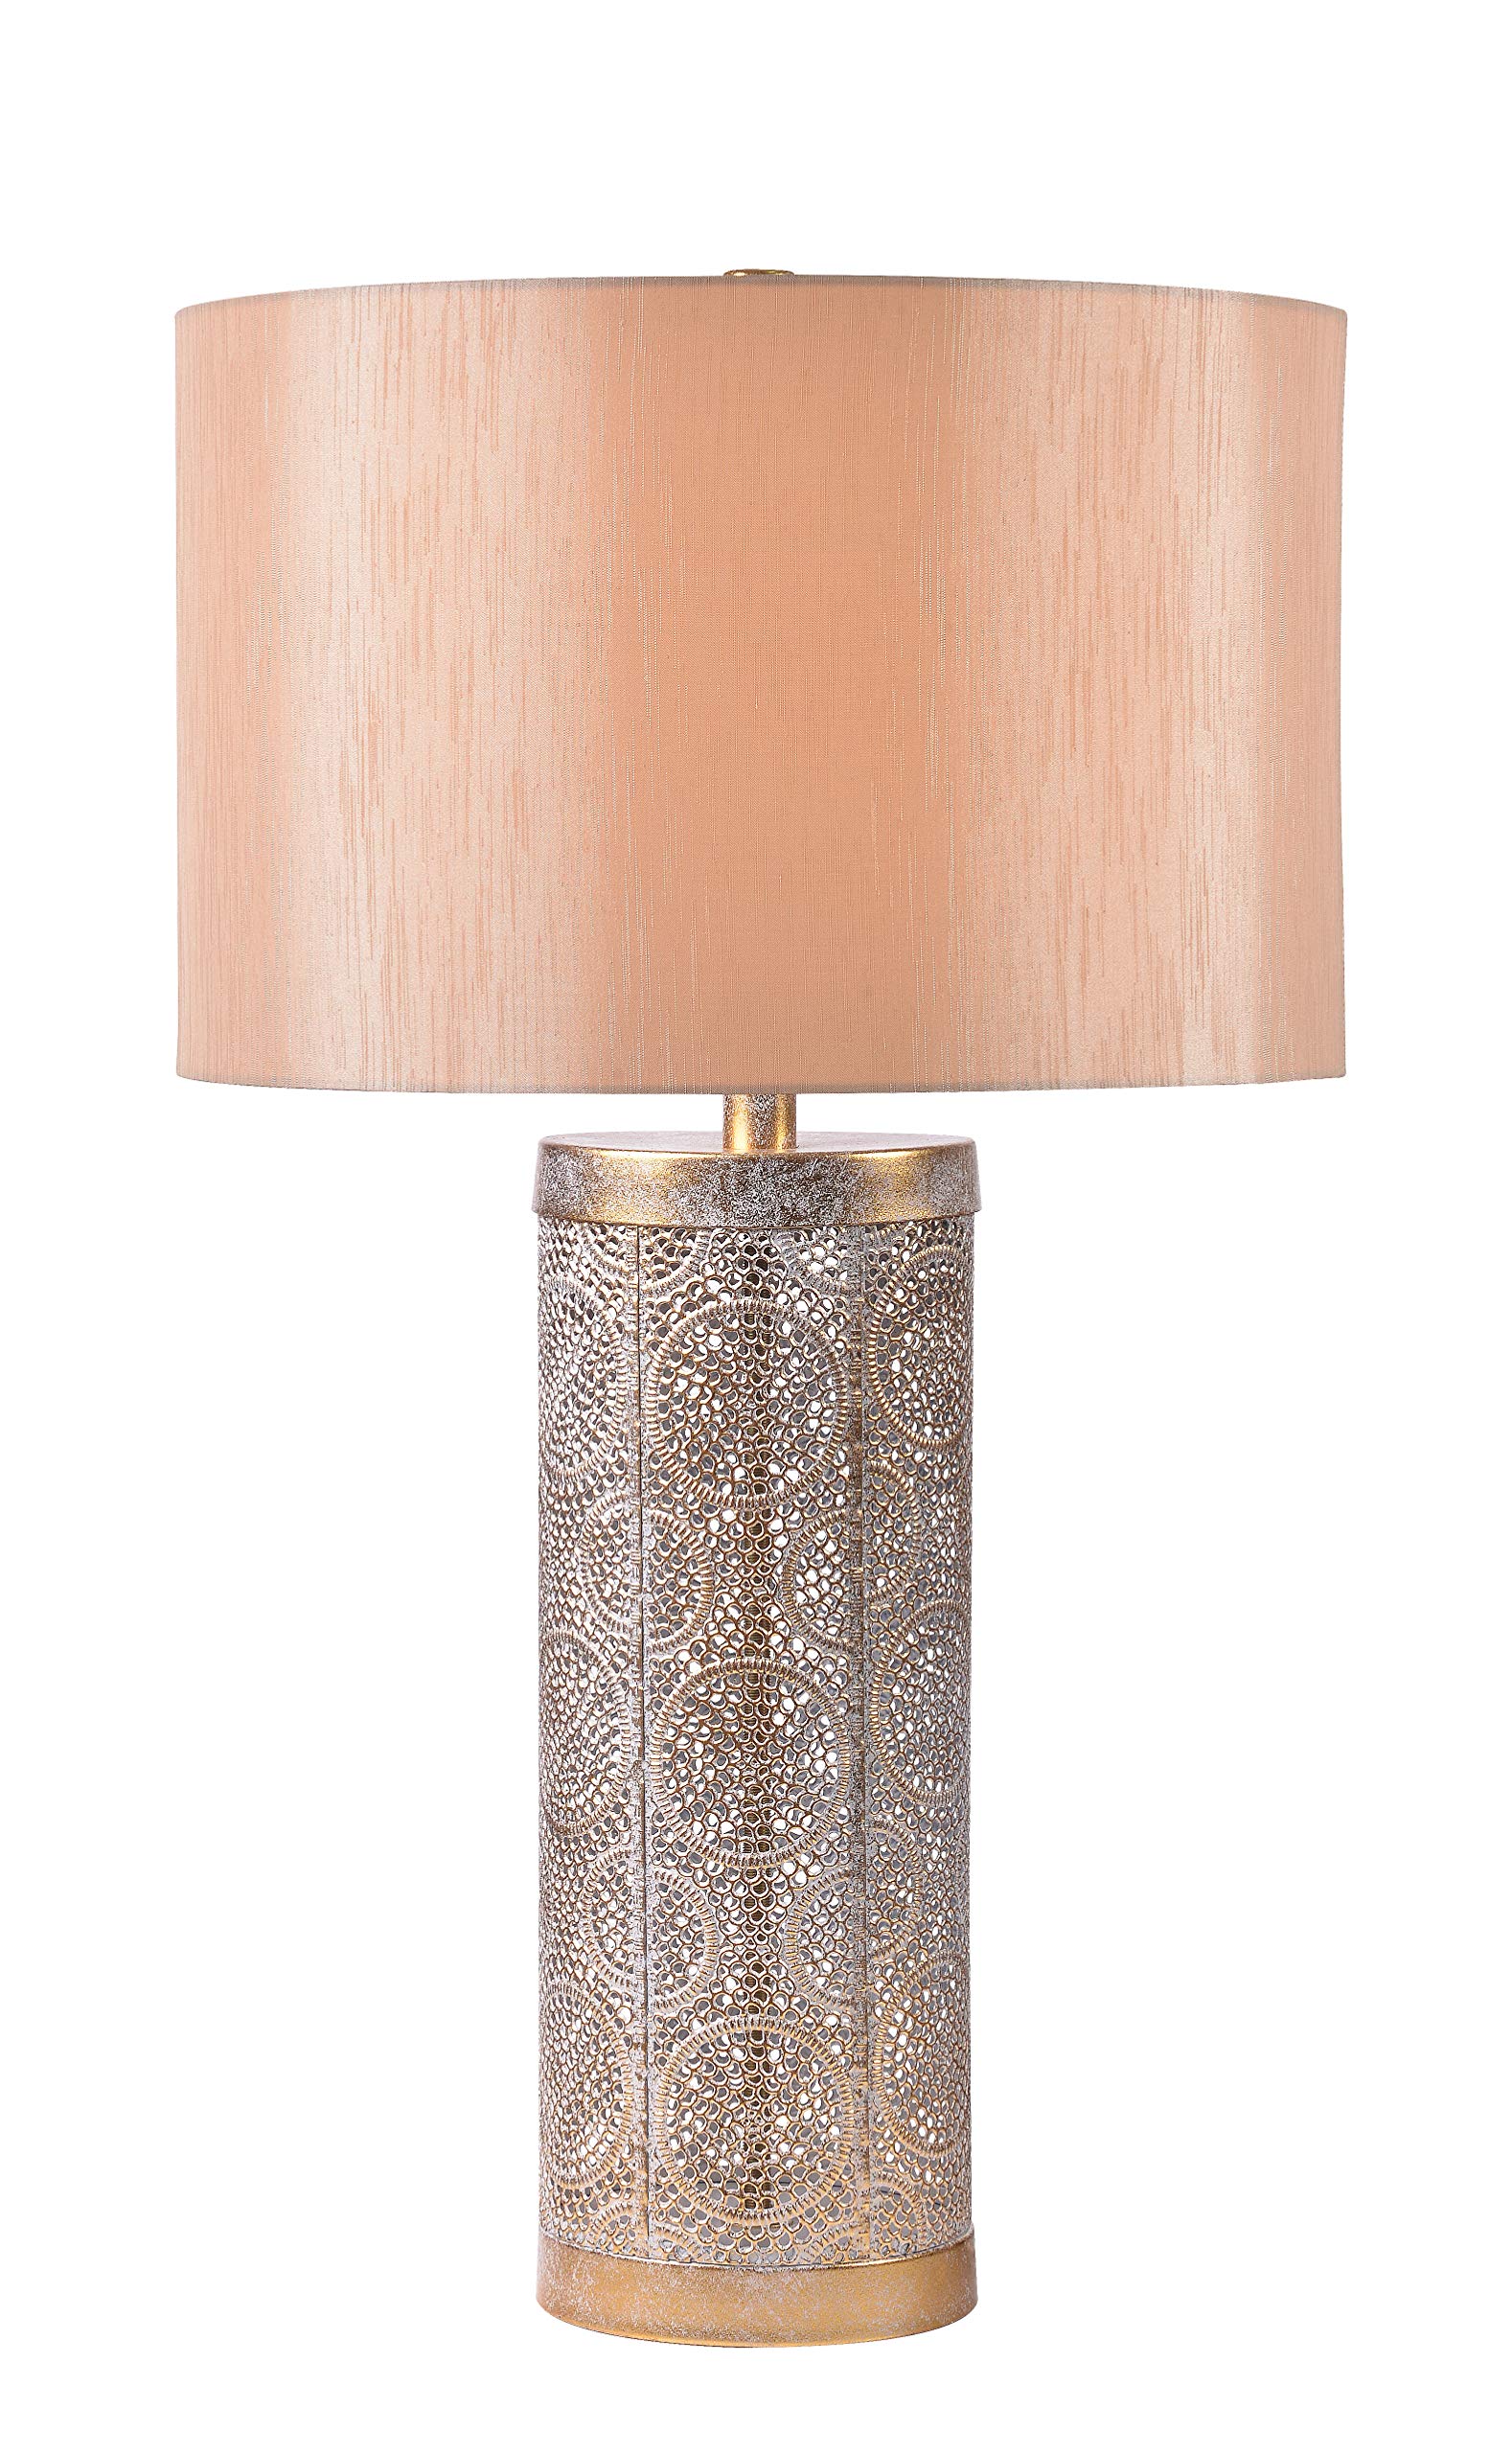 Kenroy Home 34048GLD Emme Table Lamp with White Washed Gold Finish, Casual Style, 27.75